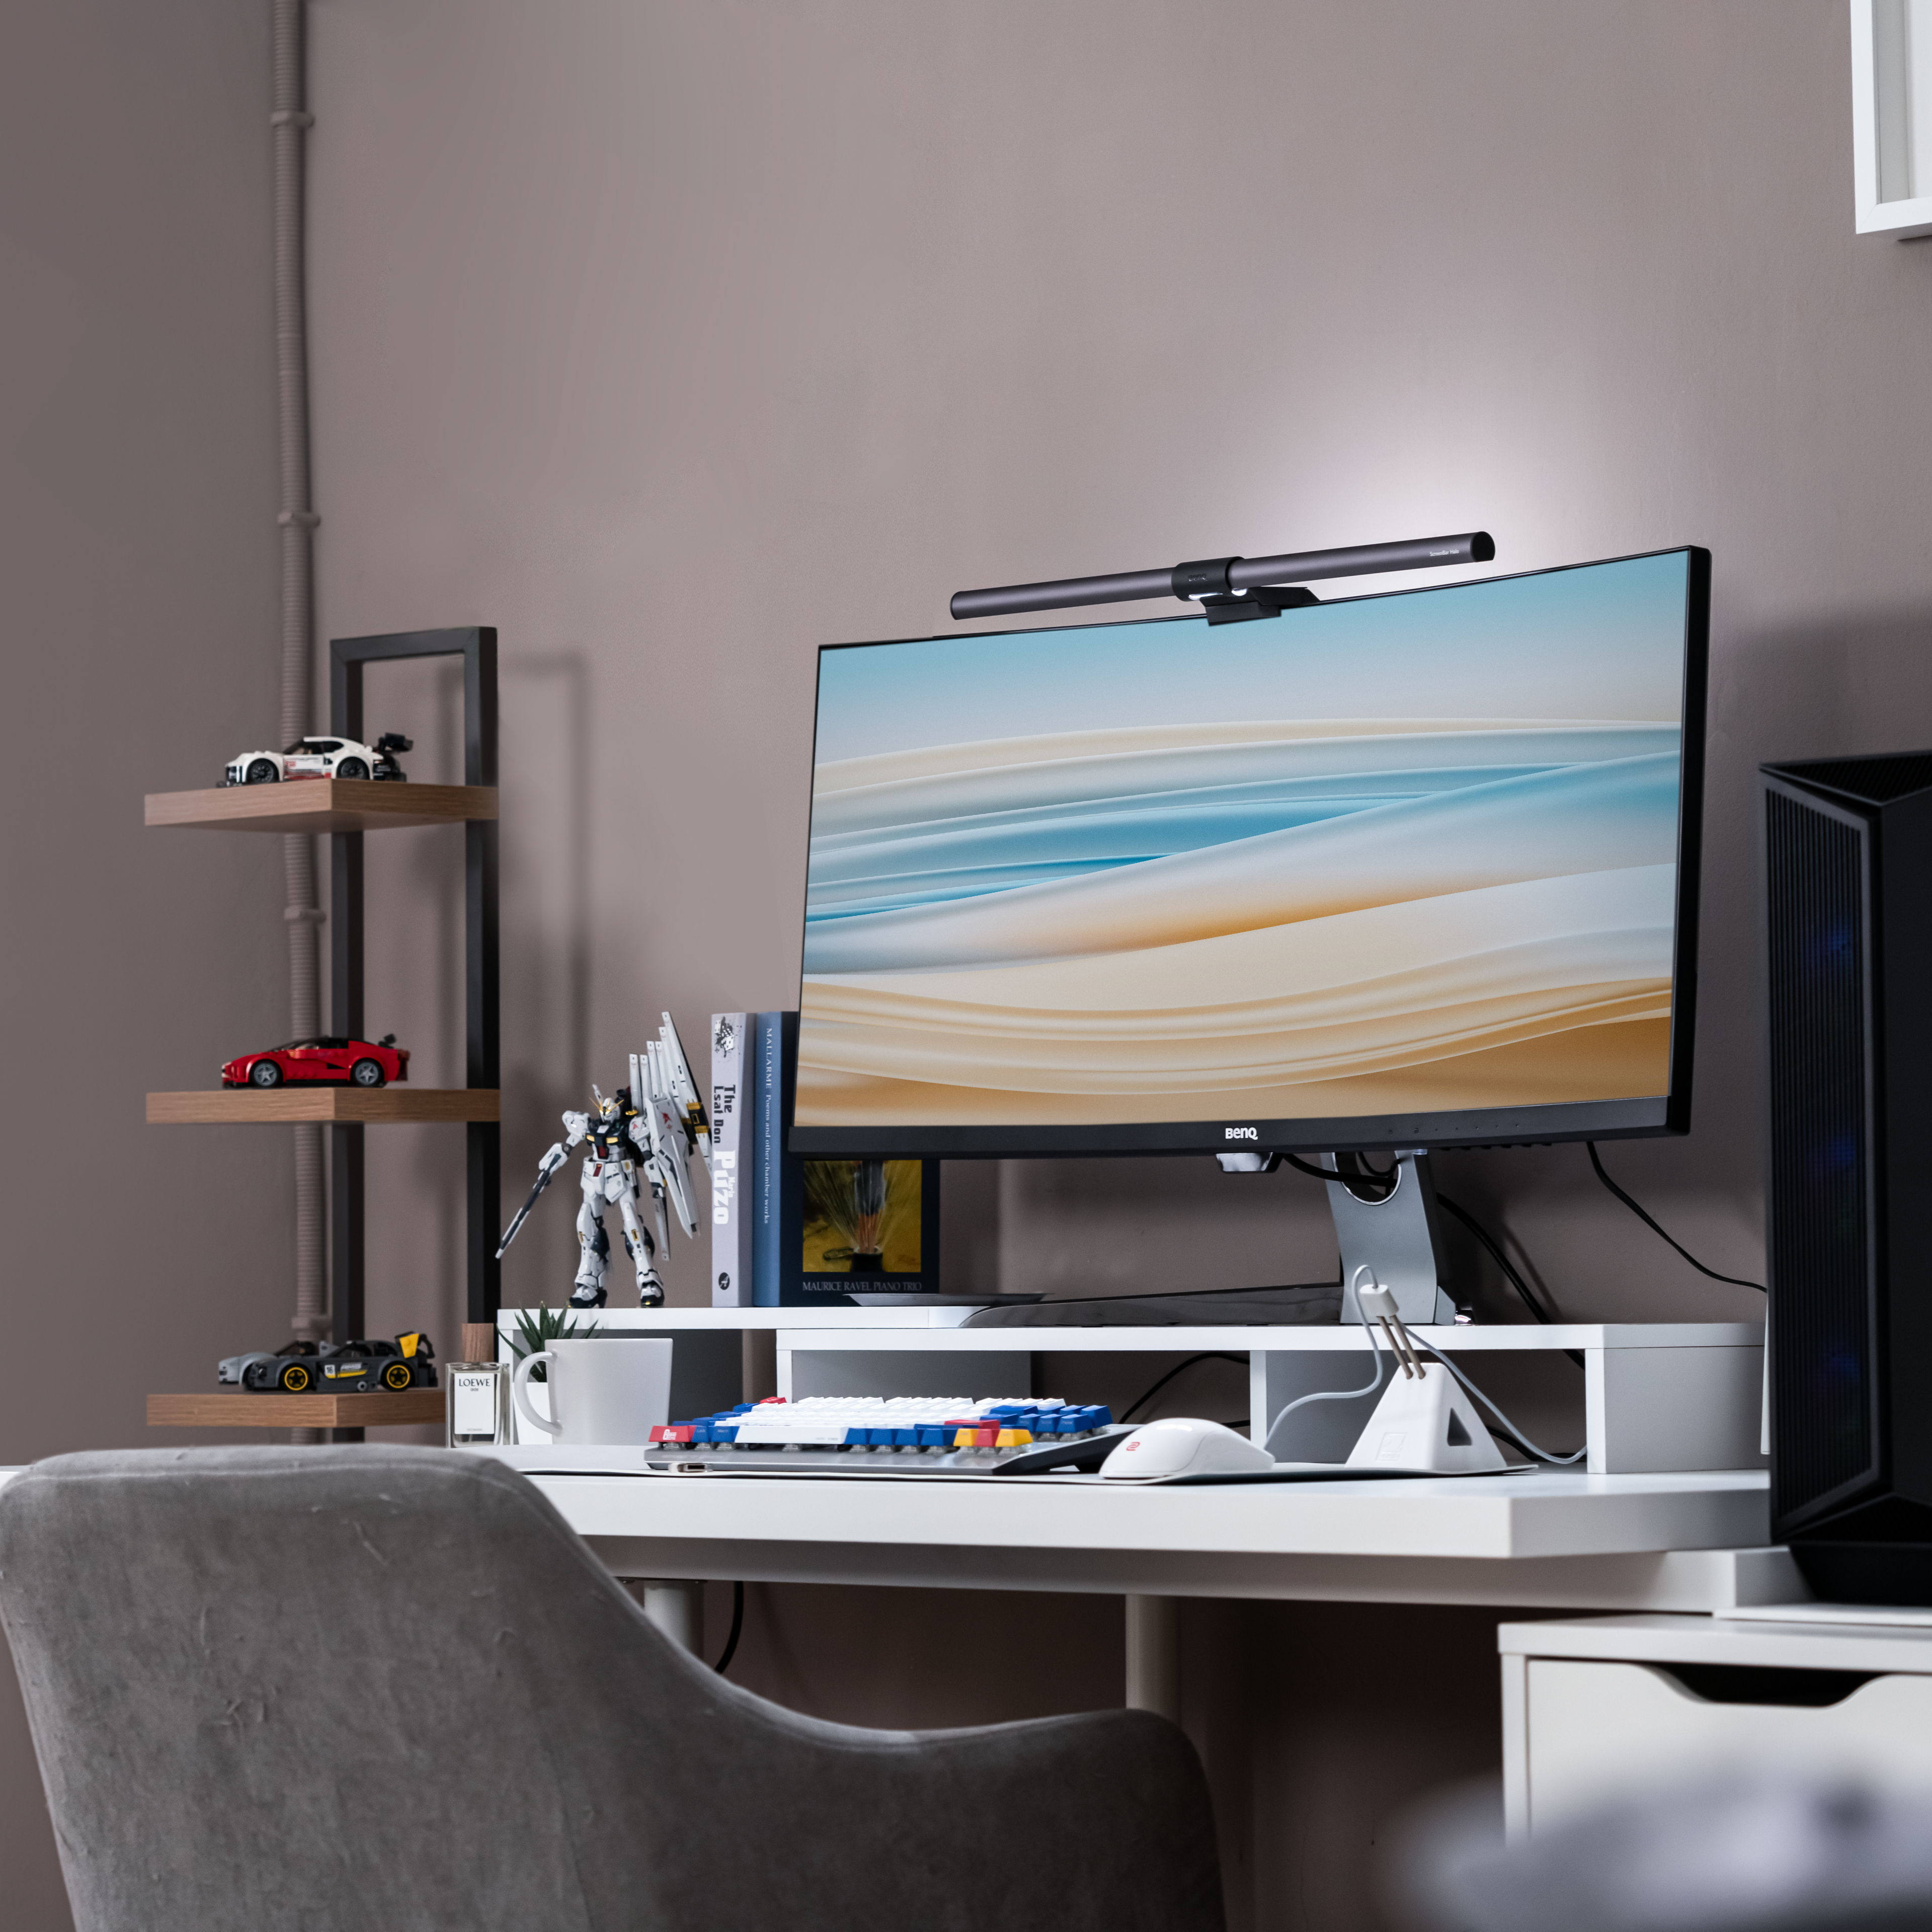 For a monitor is better a bias light or a monitor light bar, or both? :  r/Workspaces